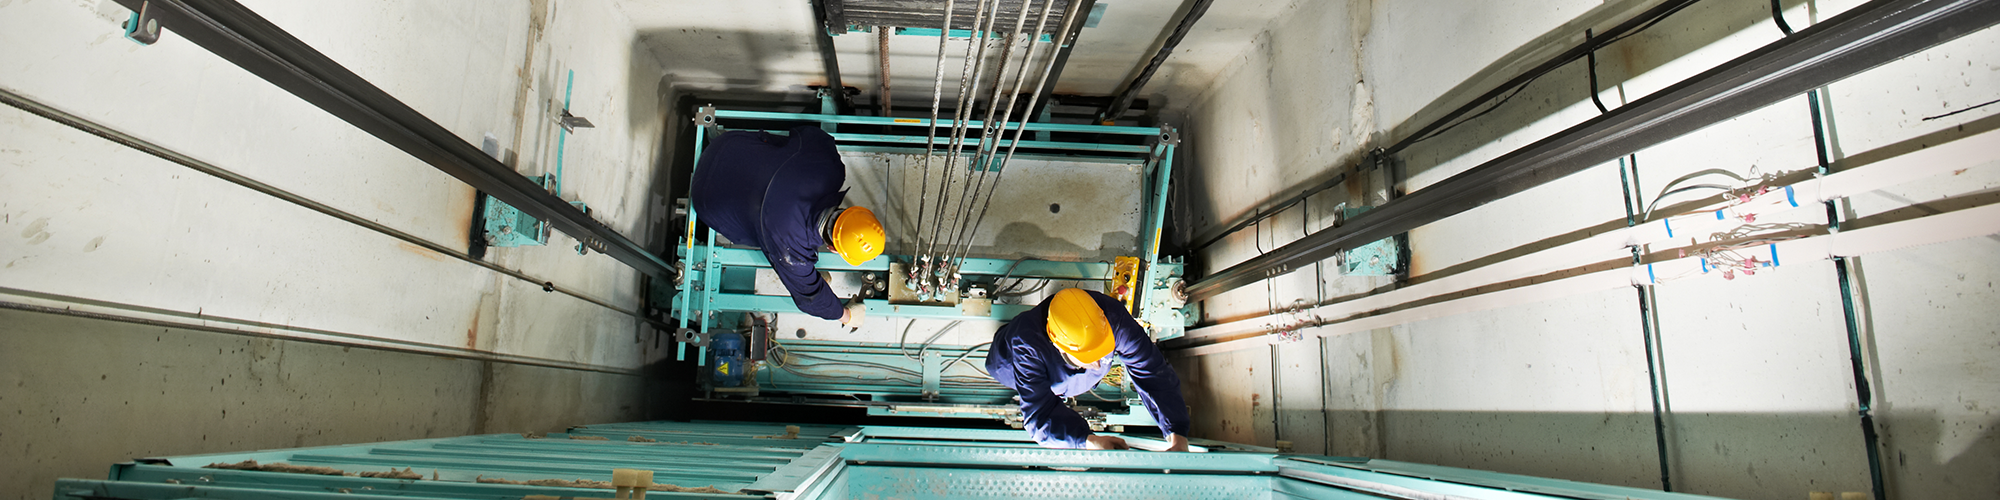 Section 20 Major Works. SAM Conveyancing breaks down leasehold major works payments, otherwise known as 'qualifying works'. Two workers in hard hats and boiler suits are in a lift shaft, repairing the lift.